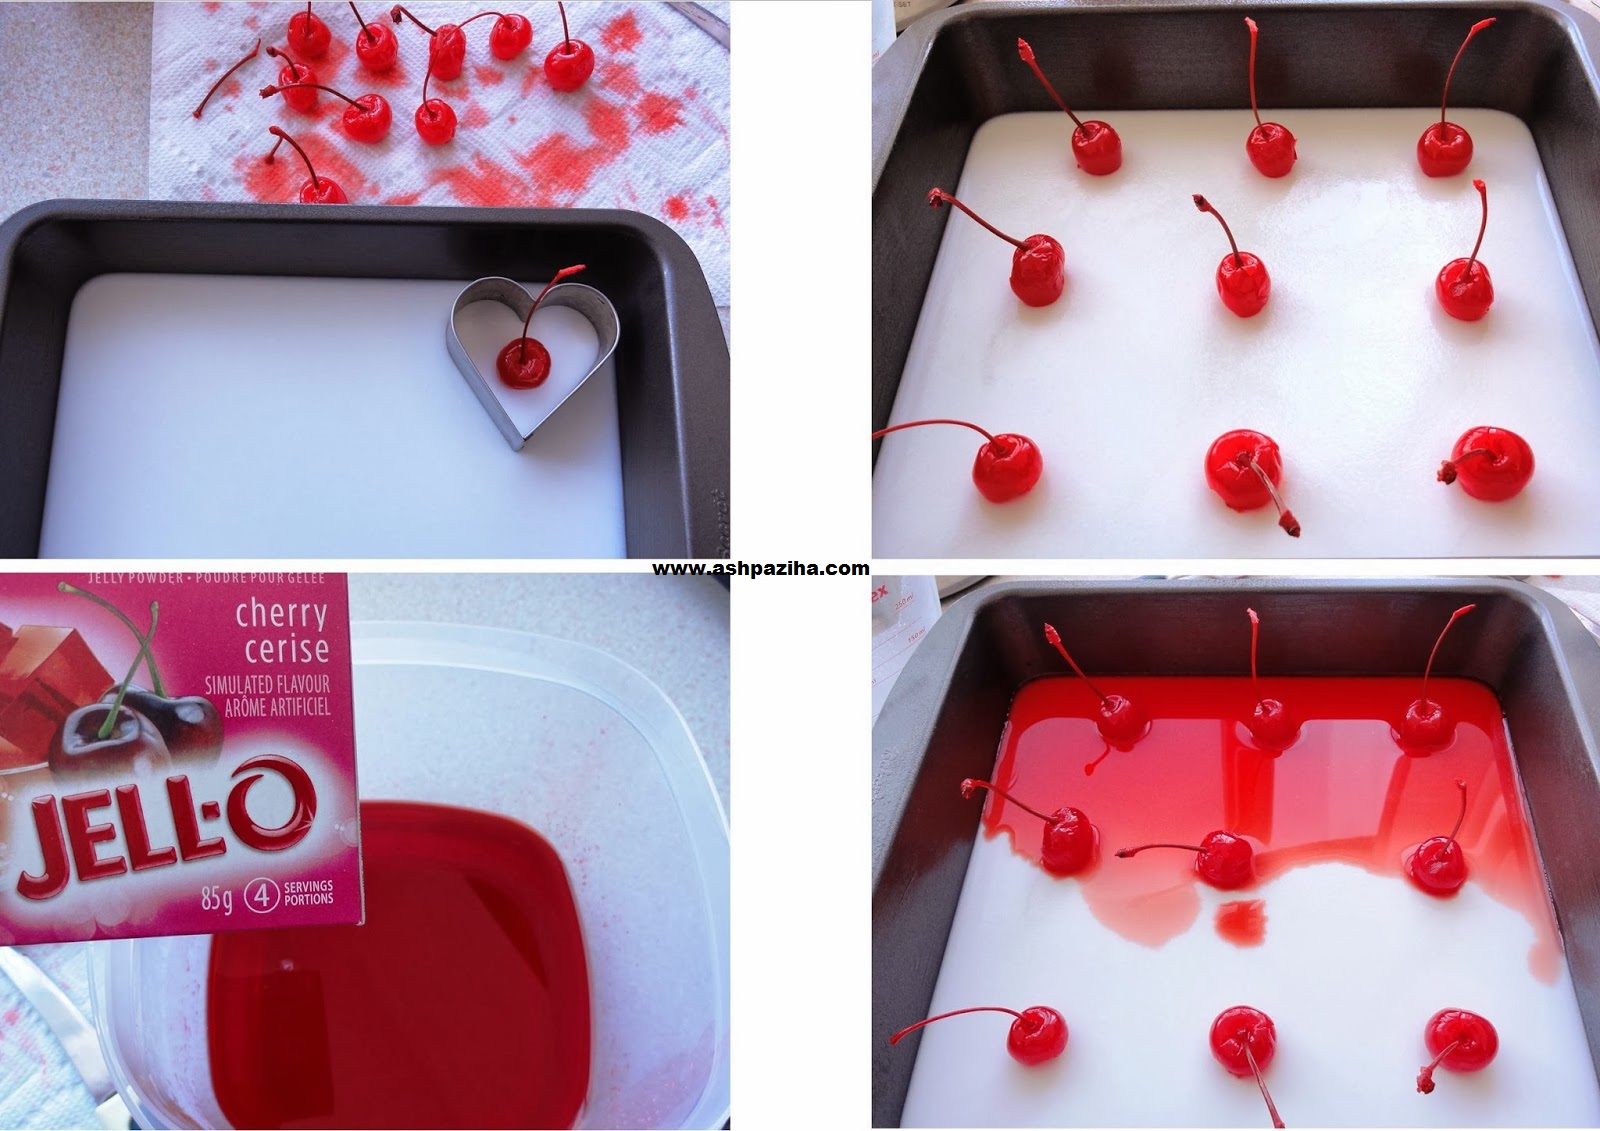 Mode - preparation - Jelly - heart - shaped - with - Cherry - Specials - Valentine (3)